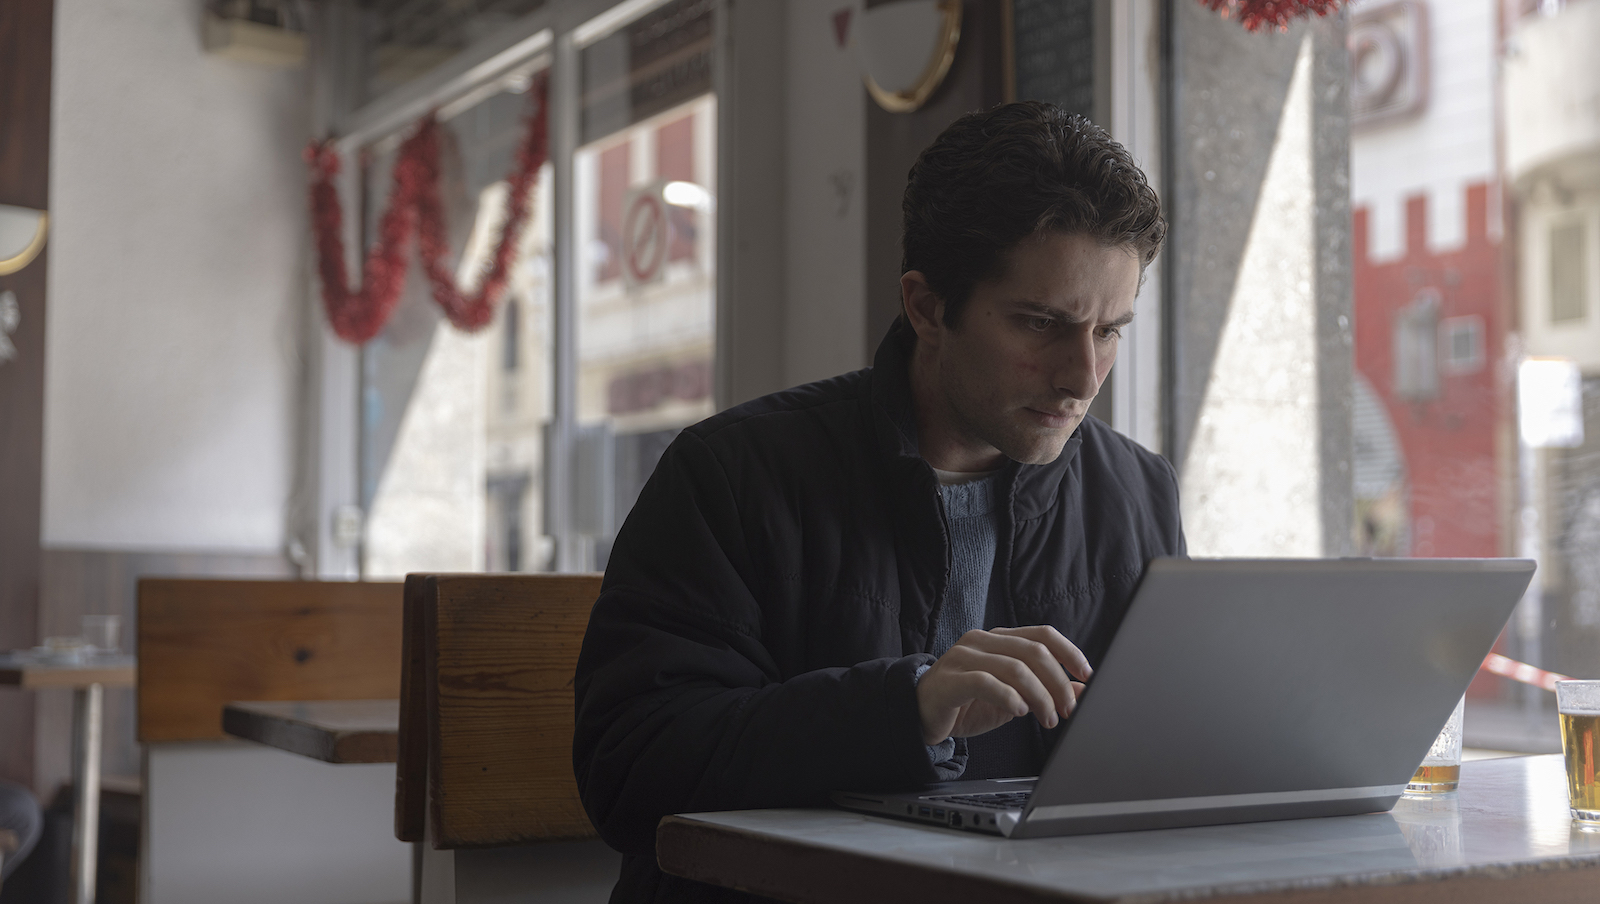 A man sits in a restaurant looking concerned at a laptop screen open in front of him.